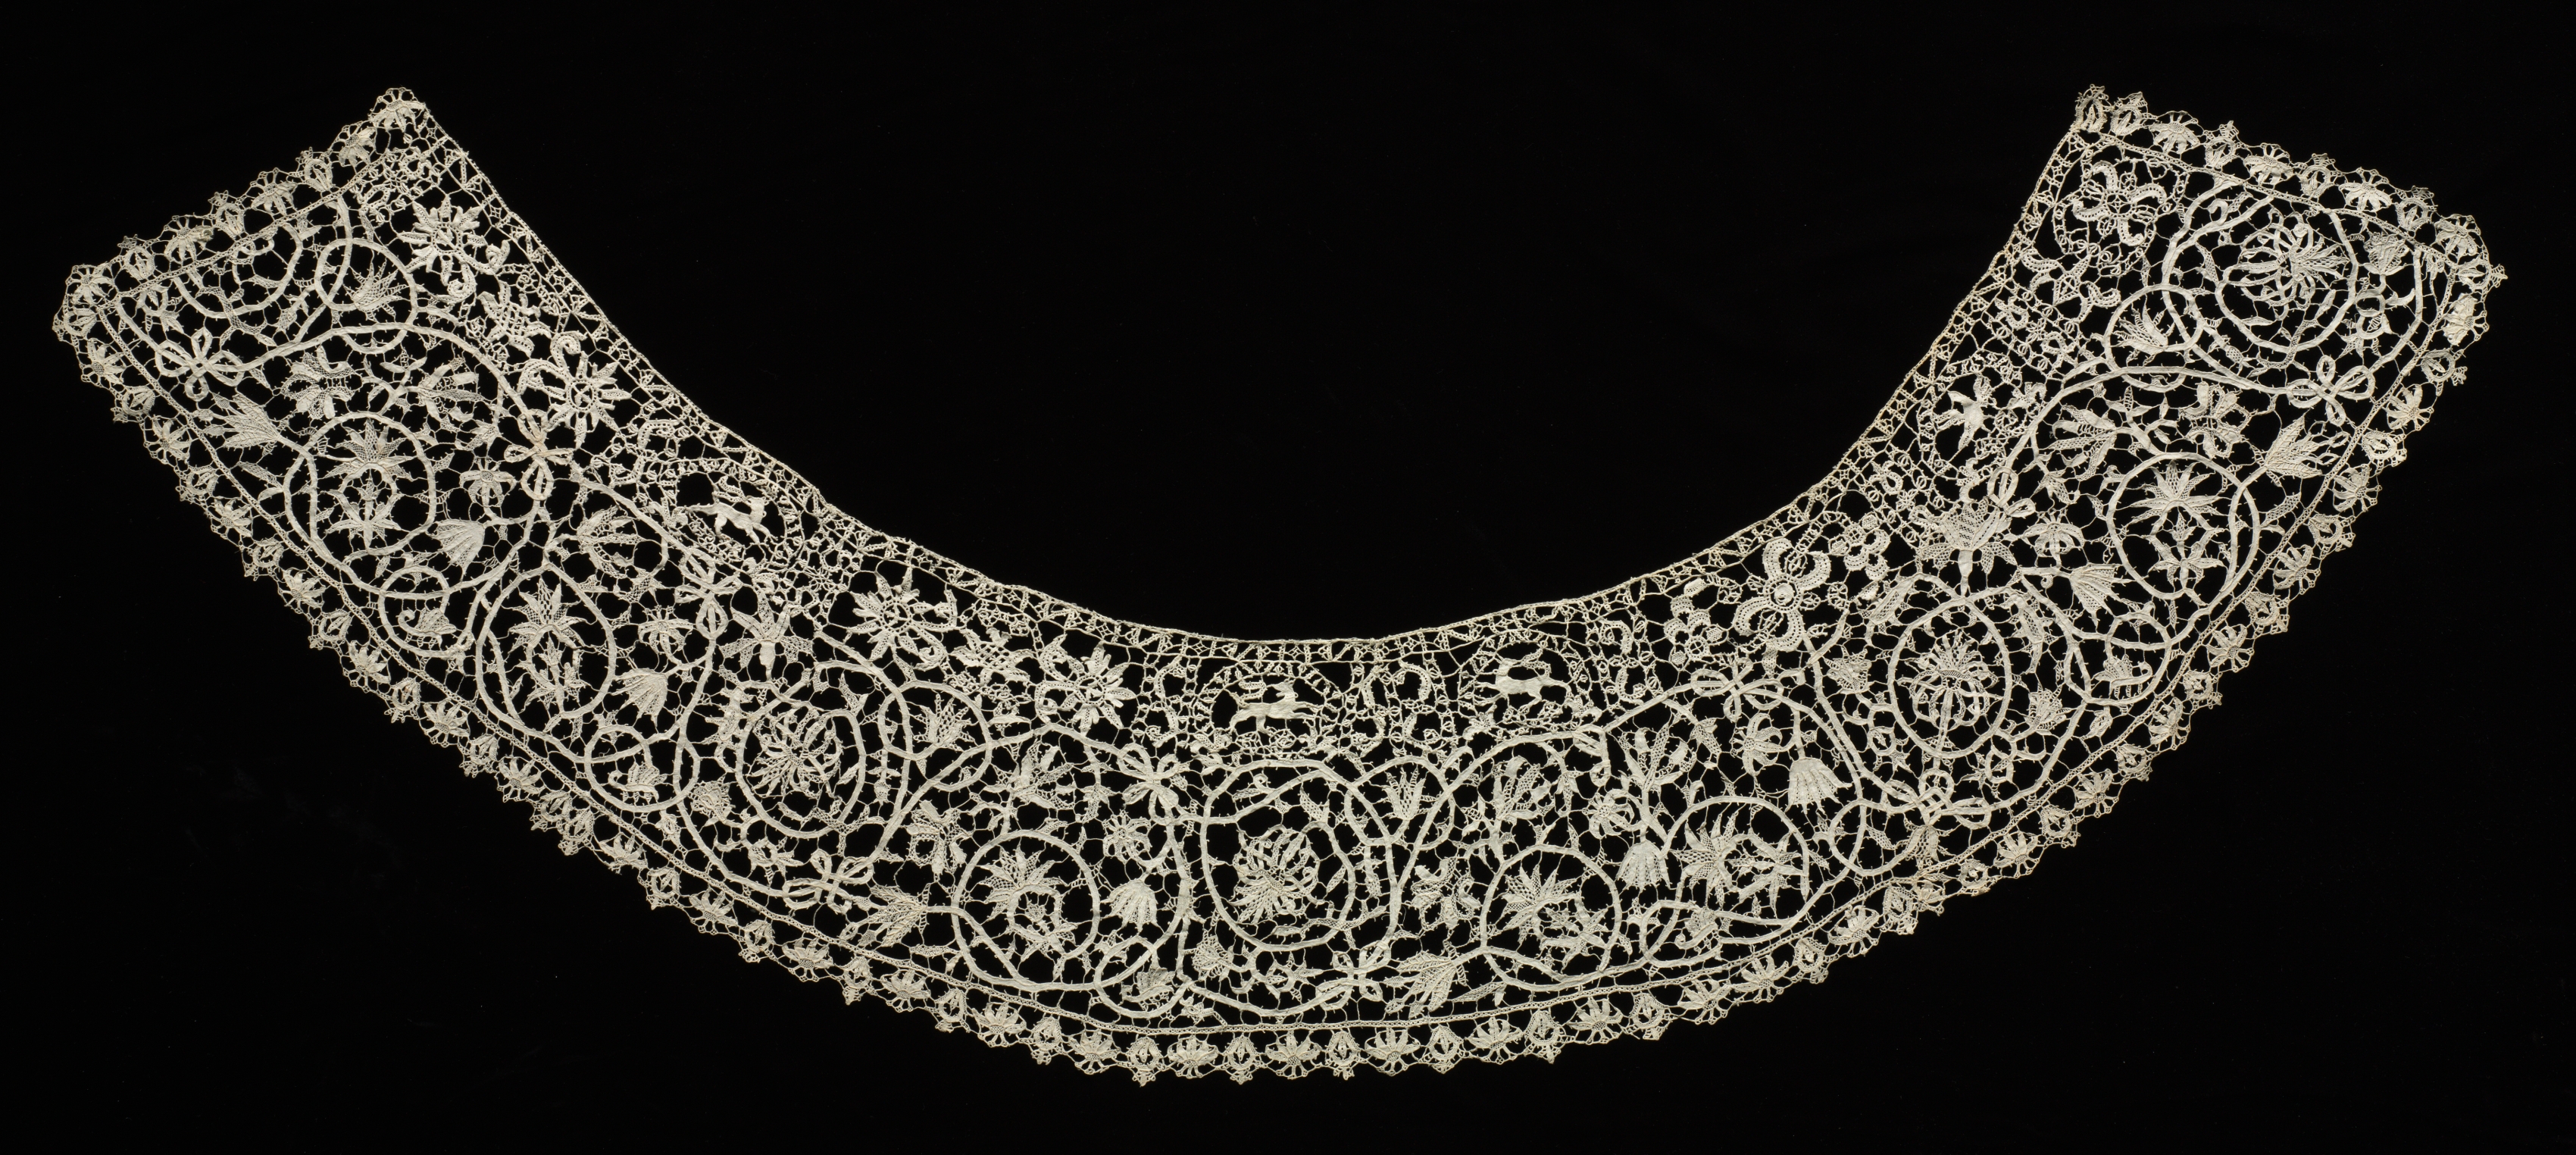 Needlepoint (Punto in aria) Lace Collar